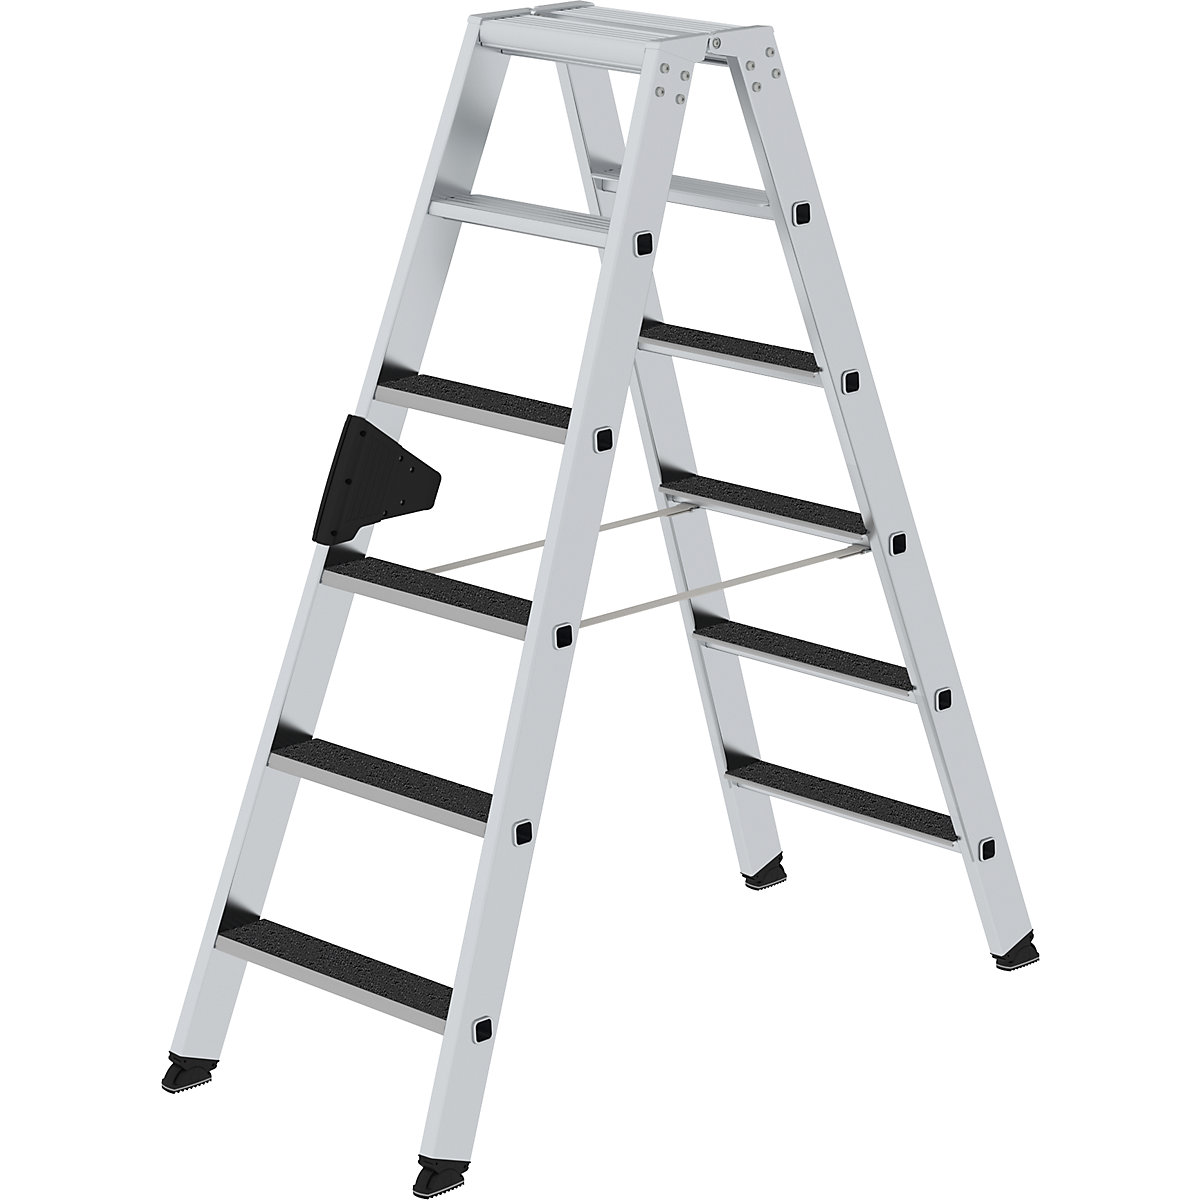 CLIP-STEP step ladder – MUNK, double sided access, slip resistant R13, 2 x 6 steps-8